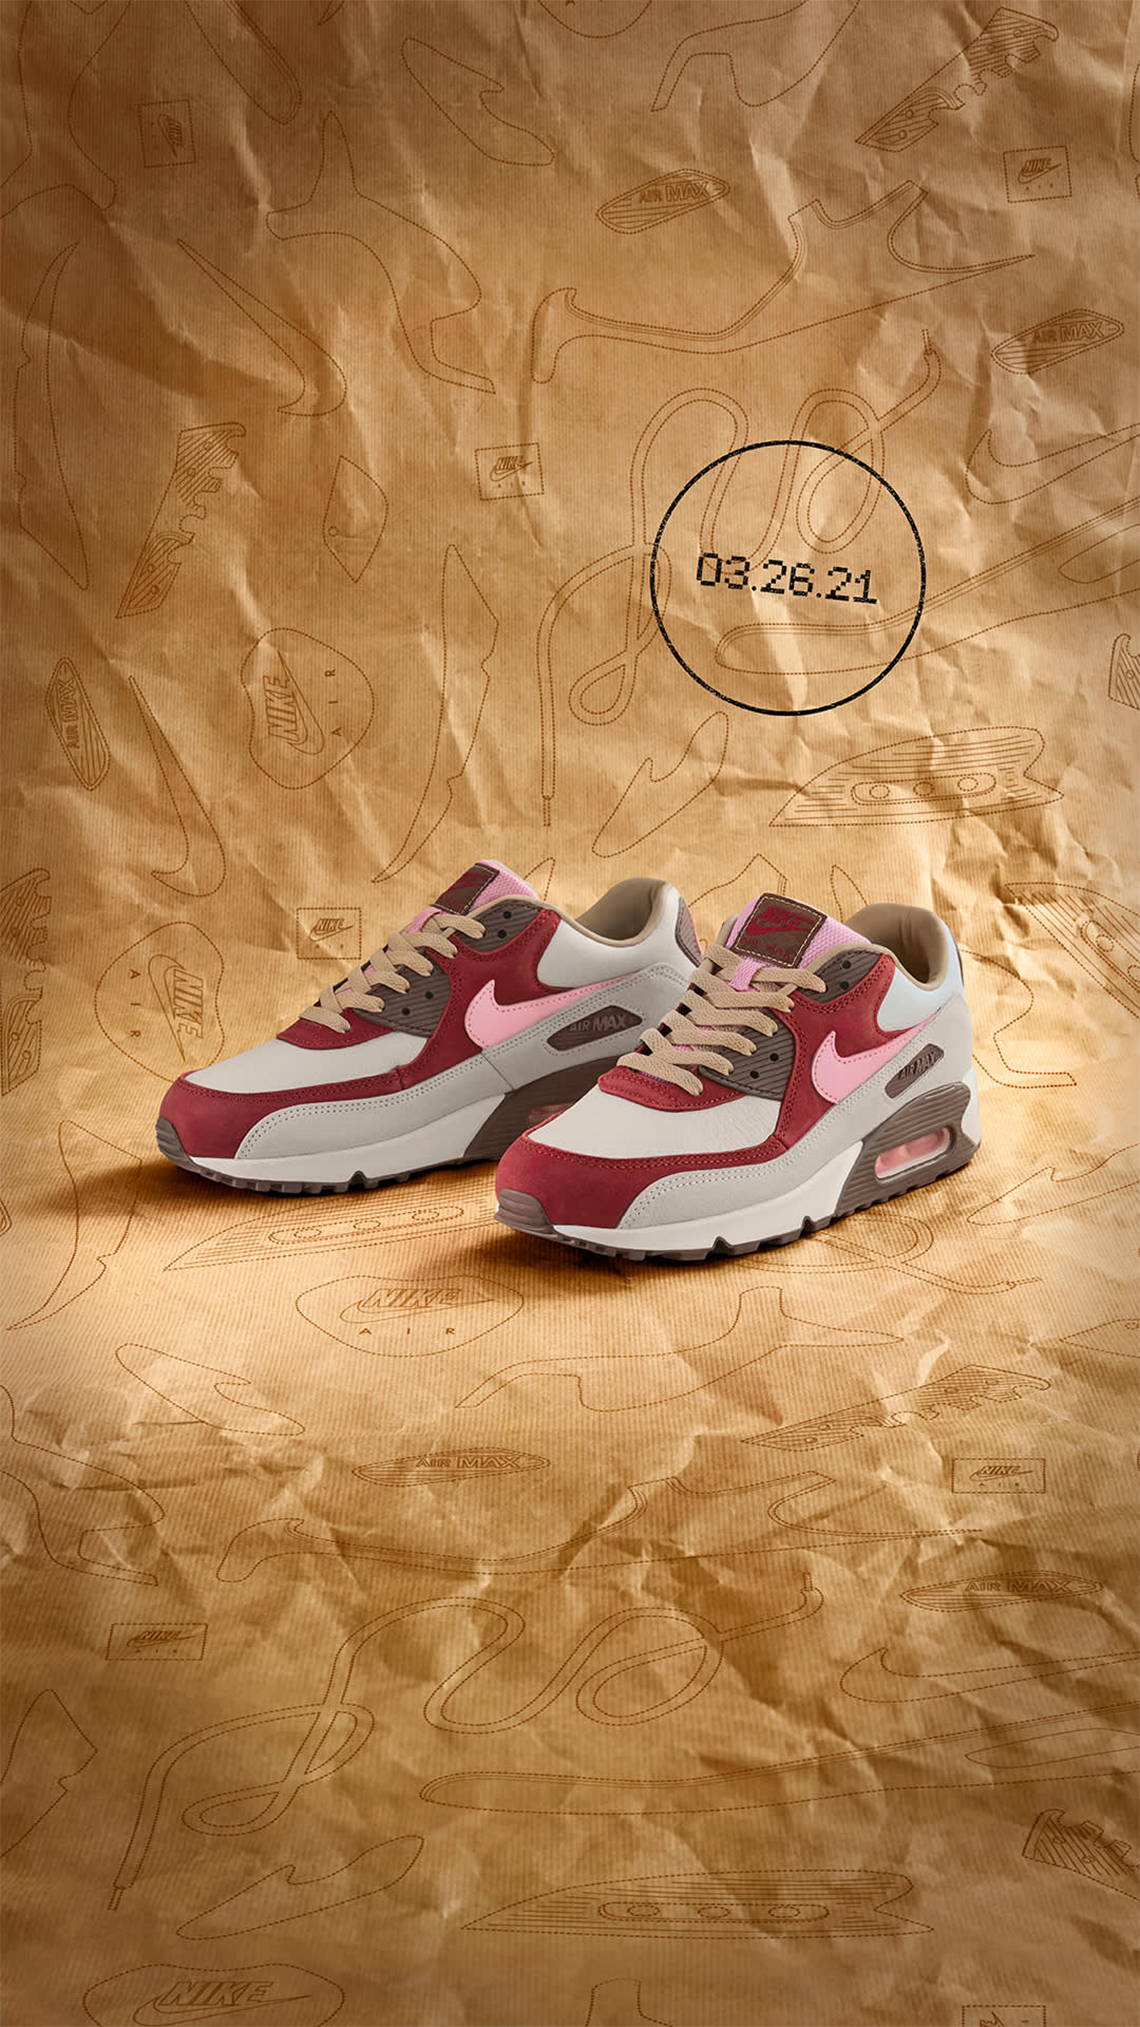 Nike Air Max 90 Bacon 2021 Release Date 2